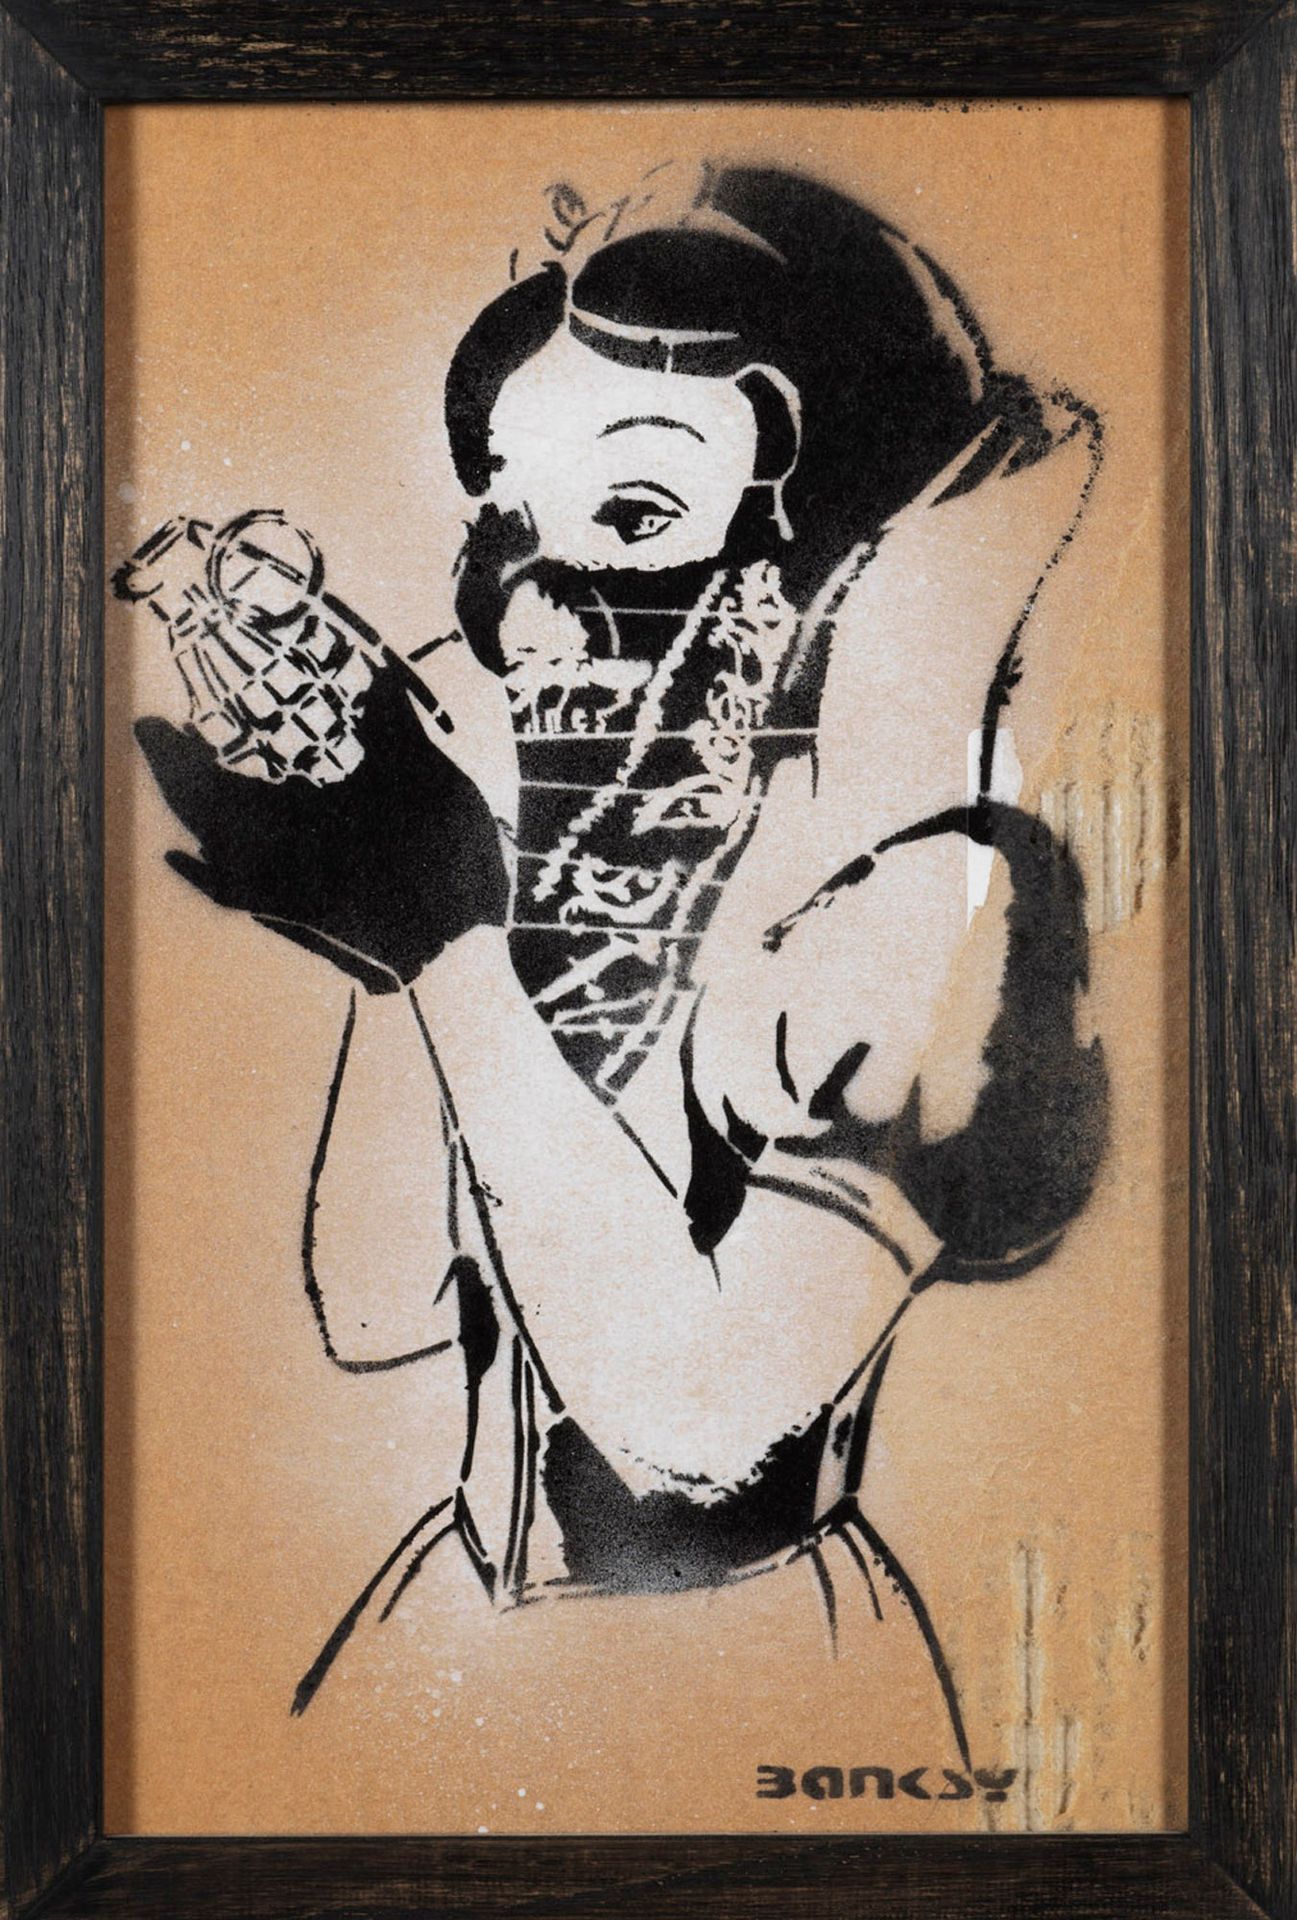 BANKSY 
BANKSY (1974) - The Snow White 

Aerosol and stencil on cardboard 

Sign&hellip;